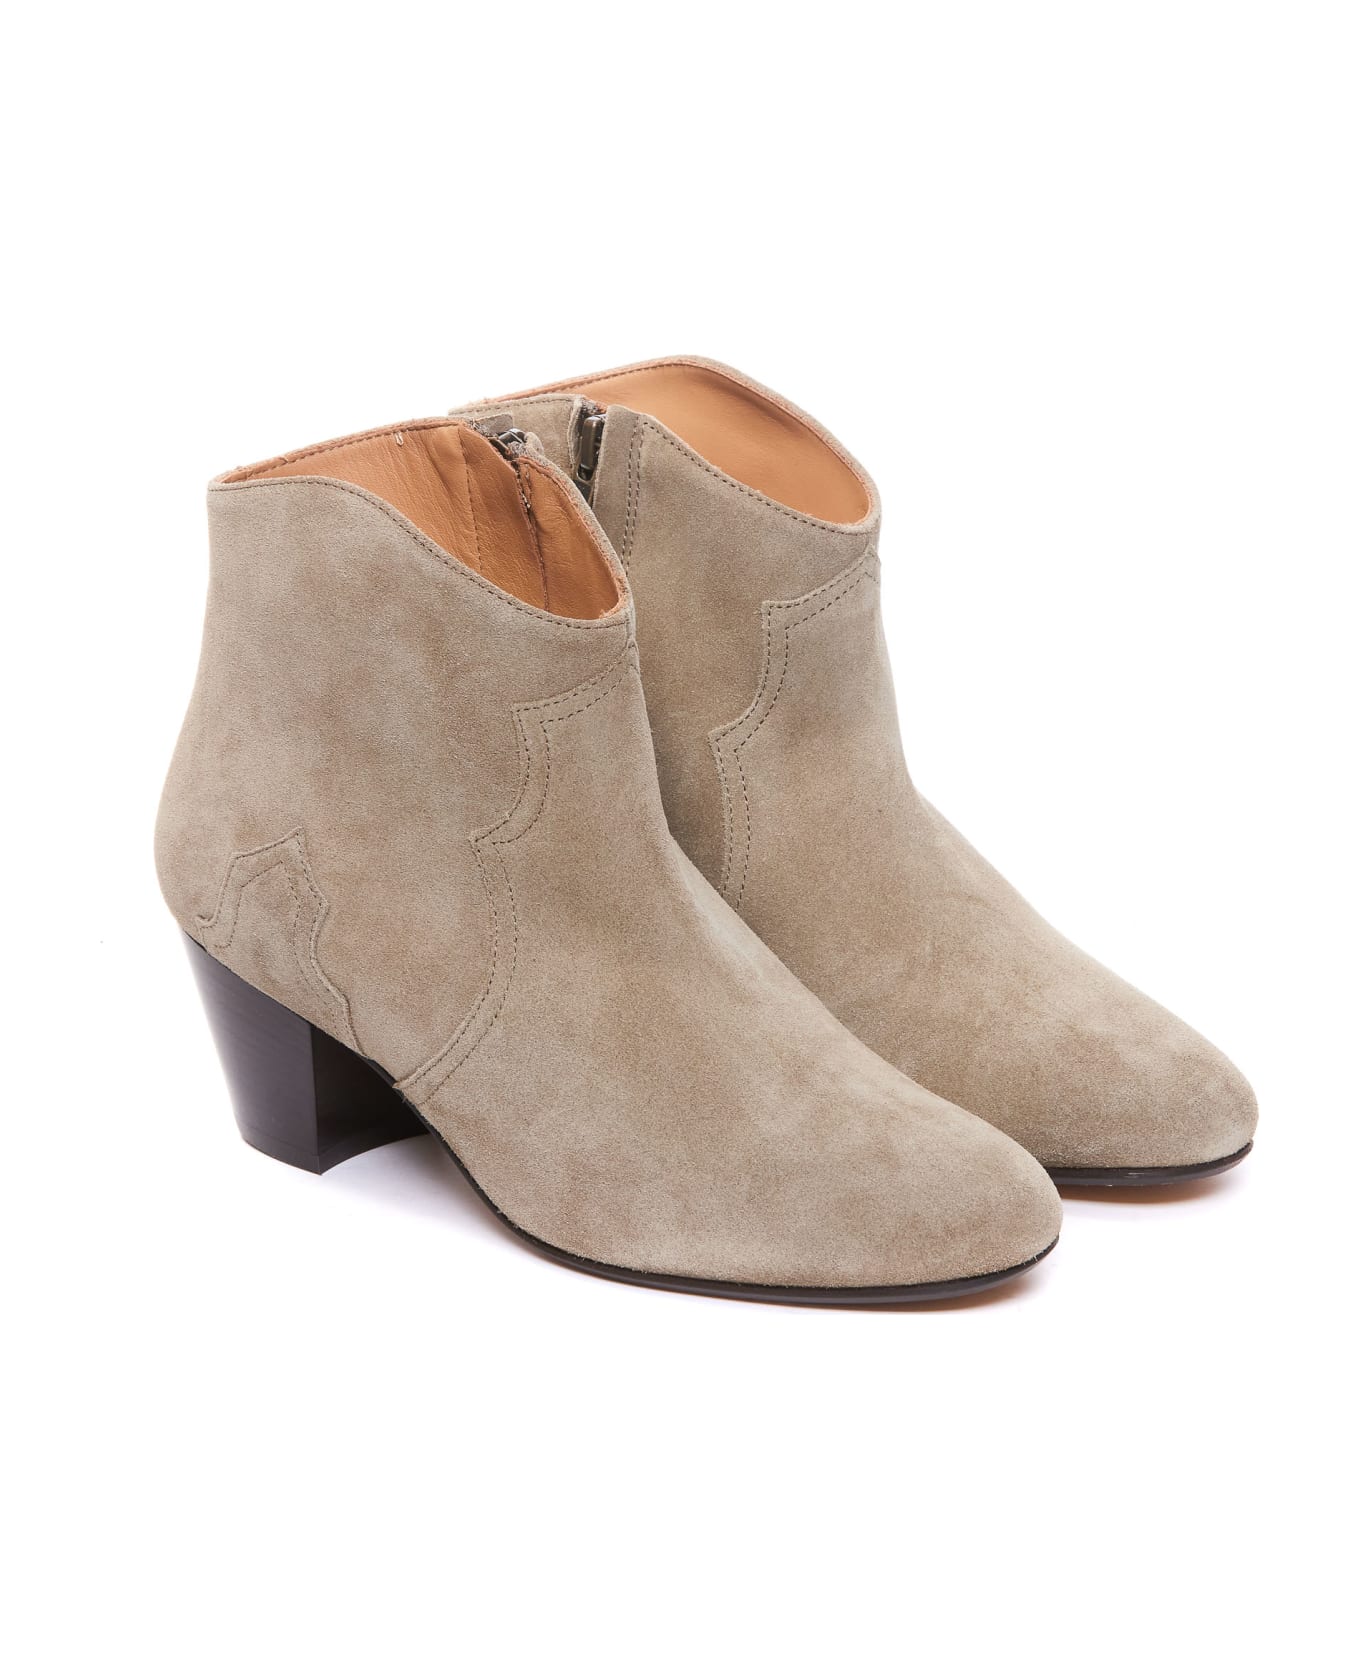 Isabel Marant Dicket Ankle Boots - Beige